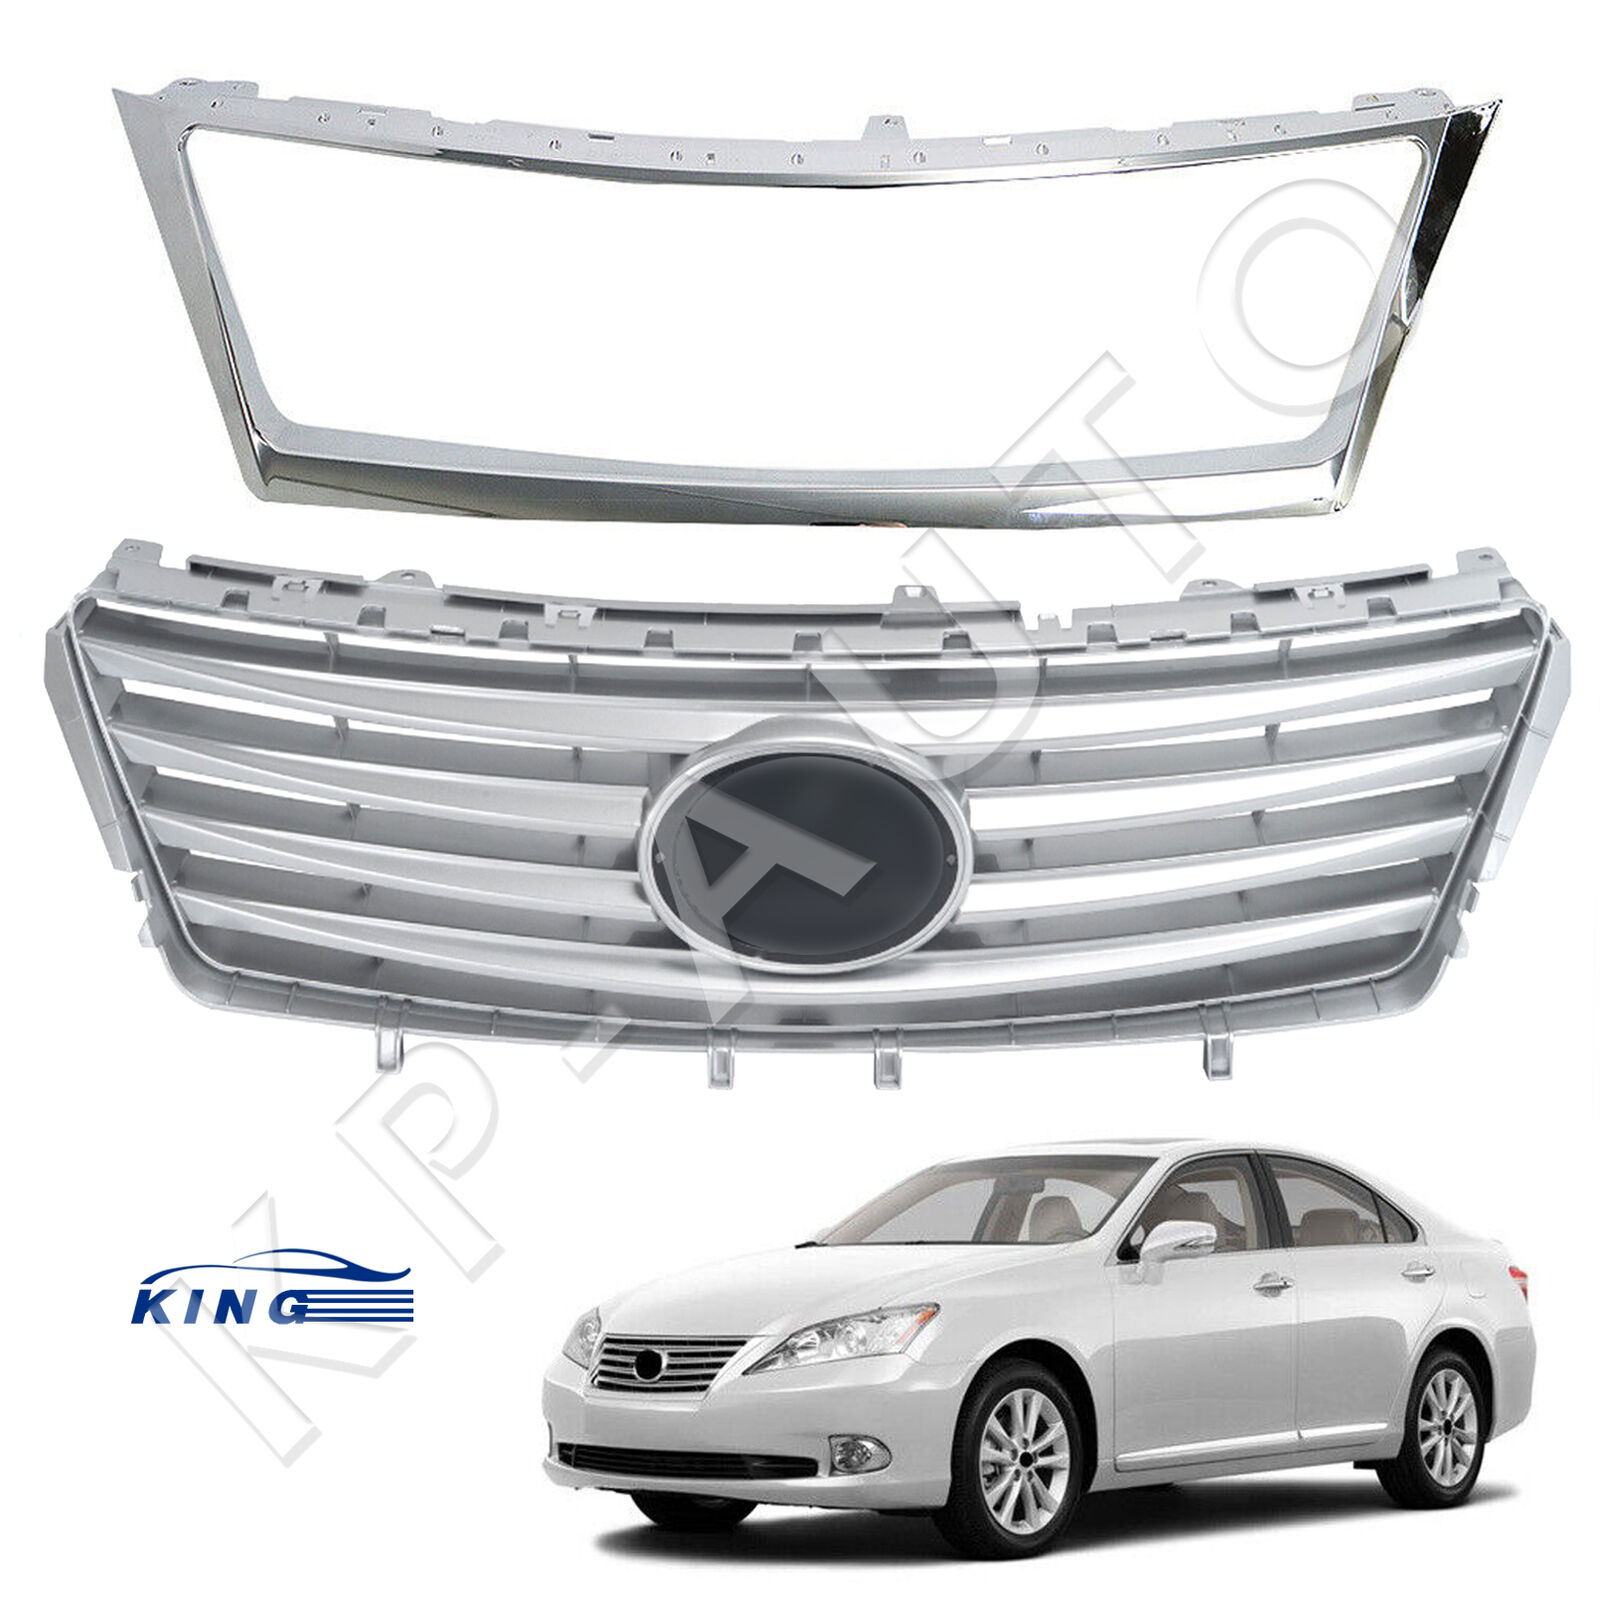 For 2010-2012 Lexus ES350 Front Bumper Upper Grille & Grill with Chrome Molding